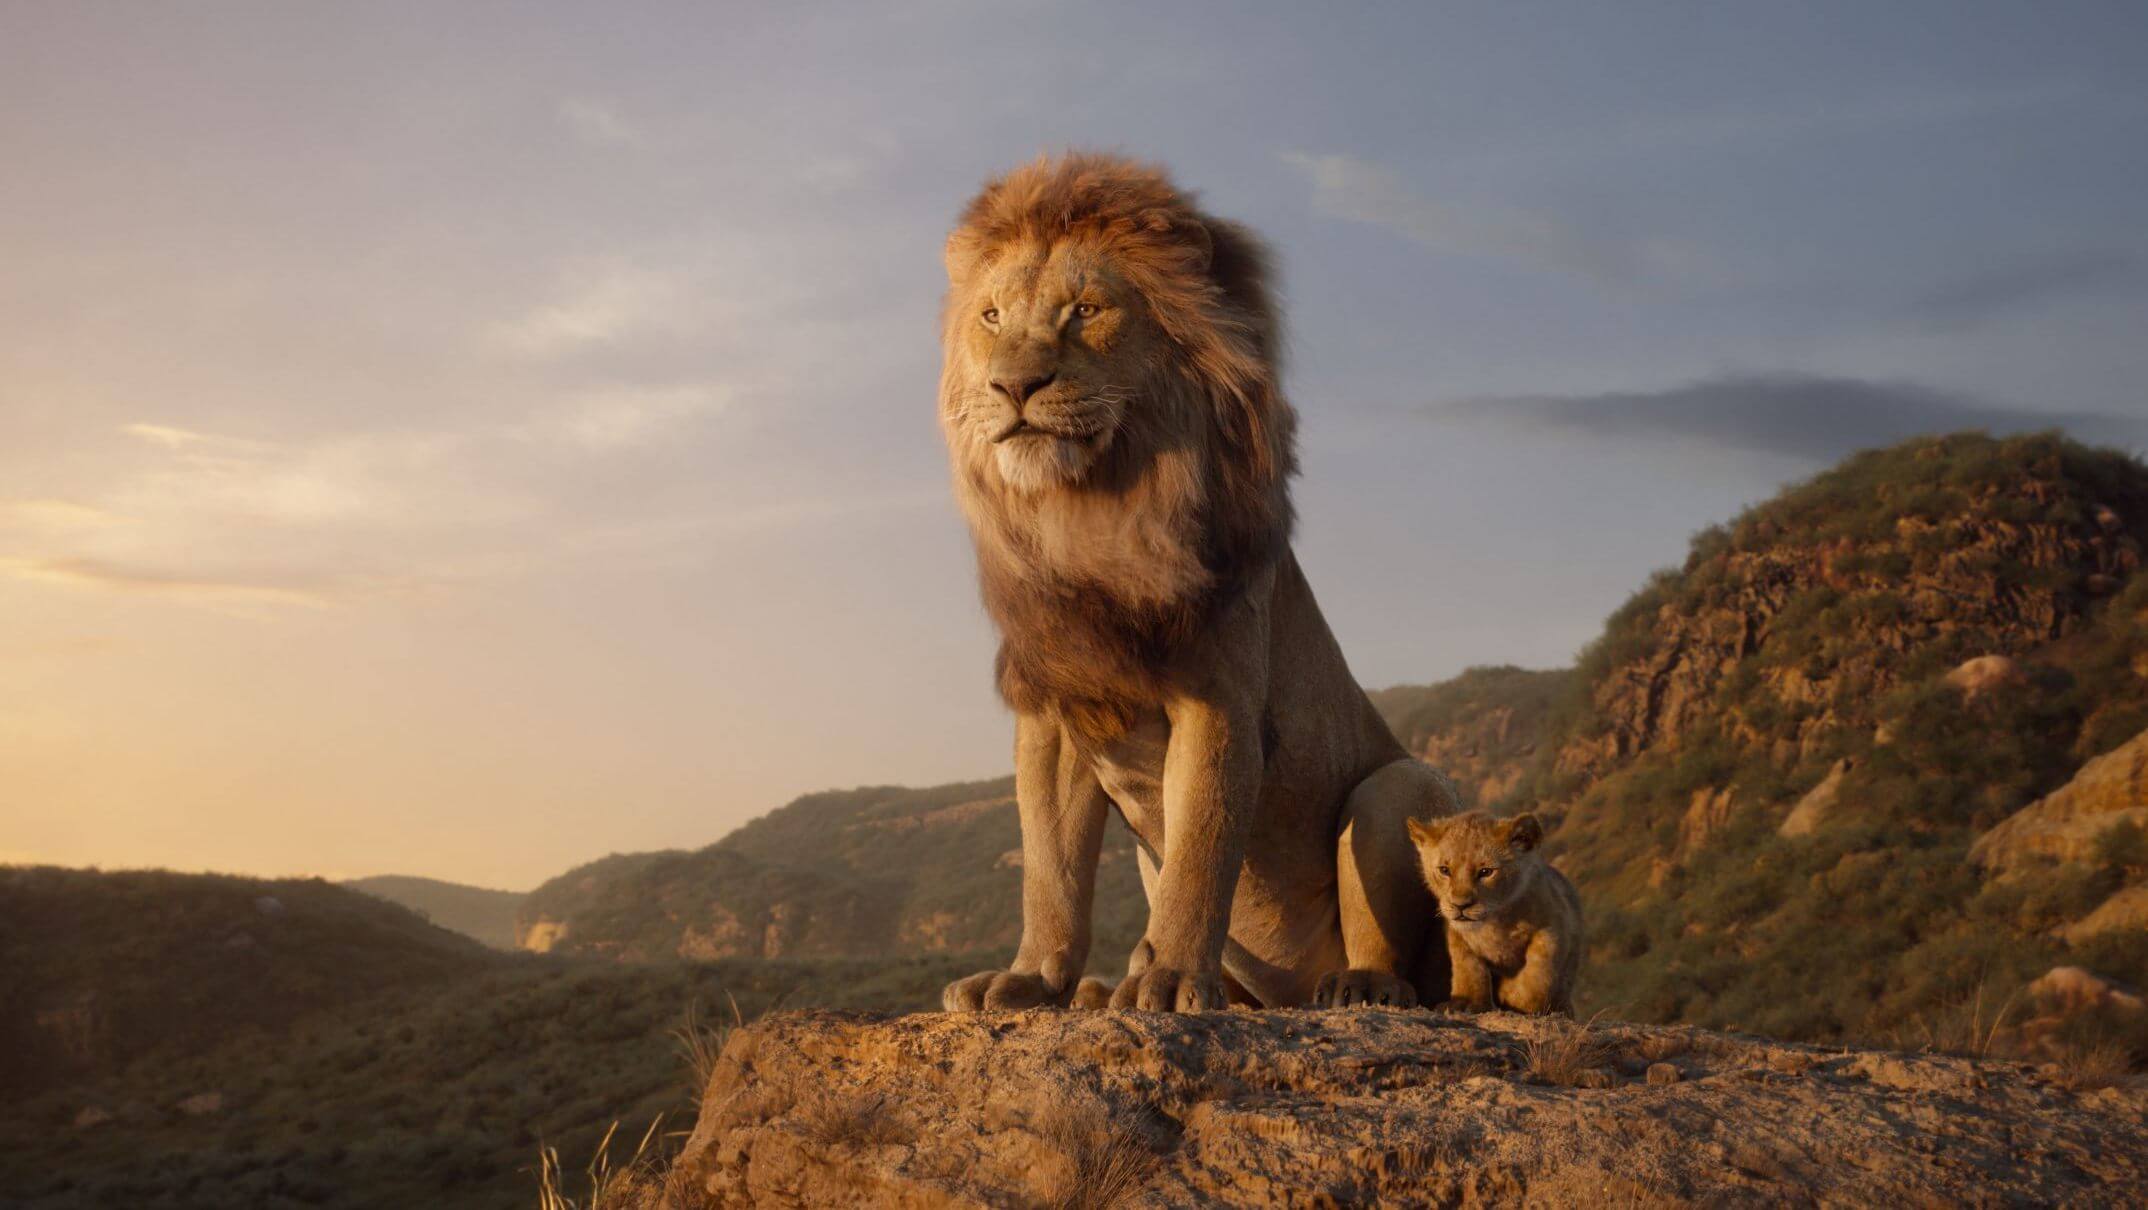 #The Lion King 2019 film Reviews and Ratings